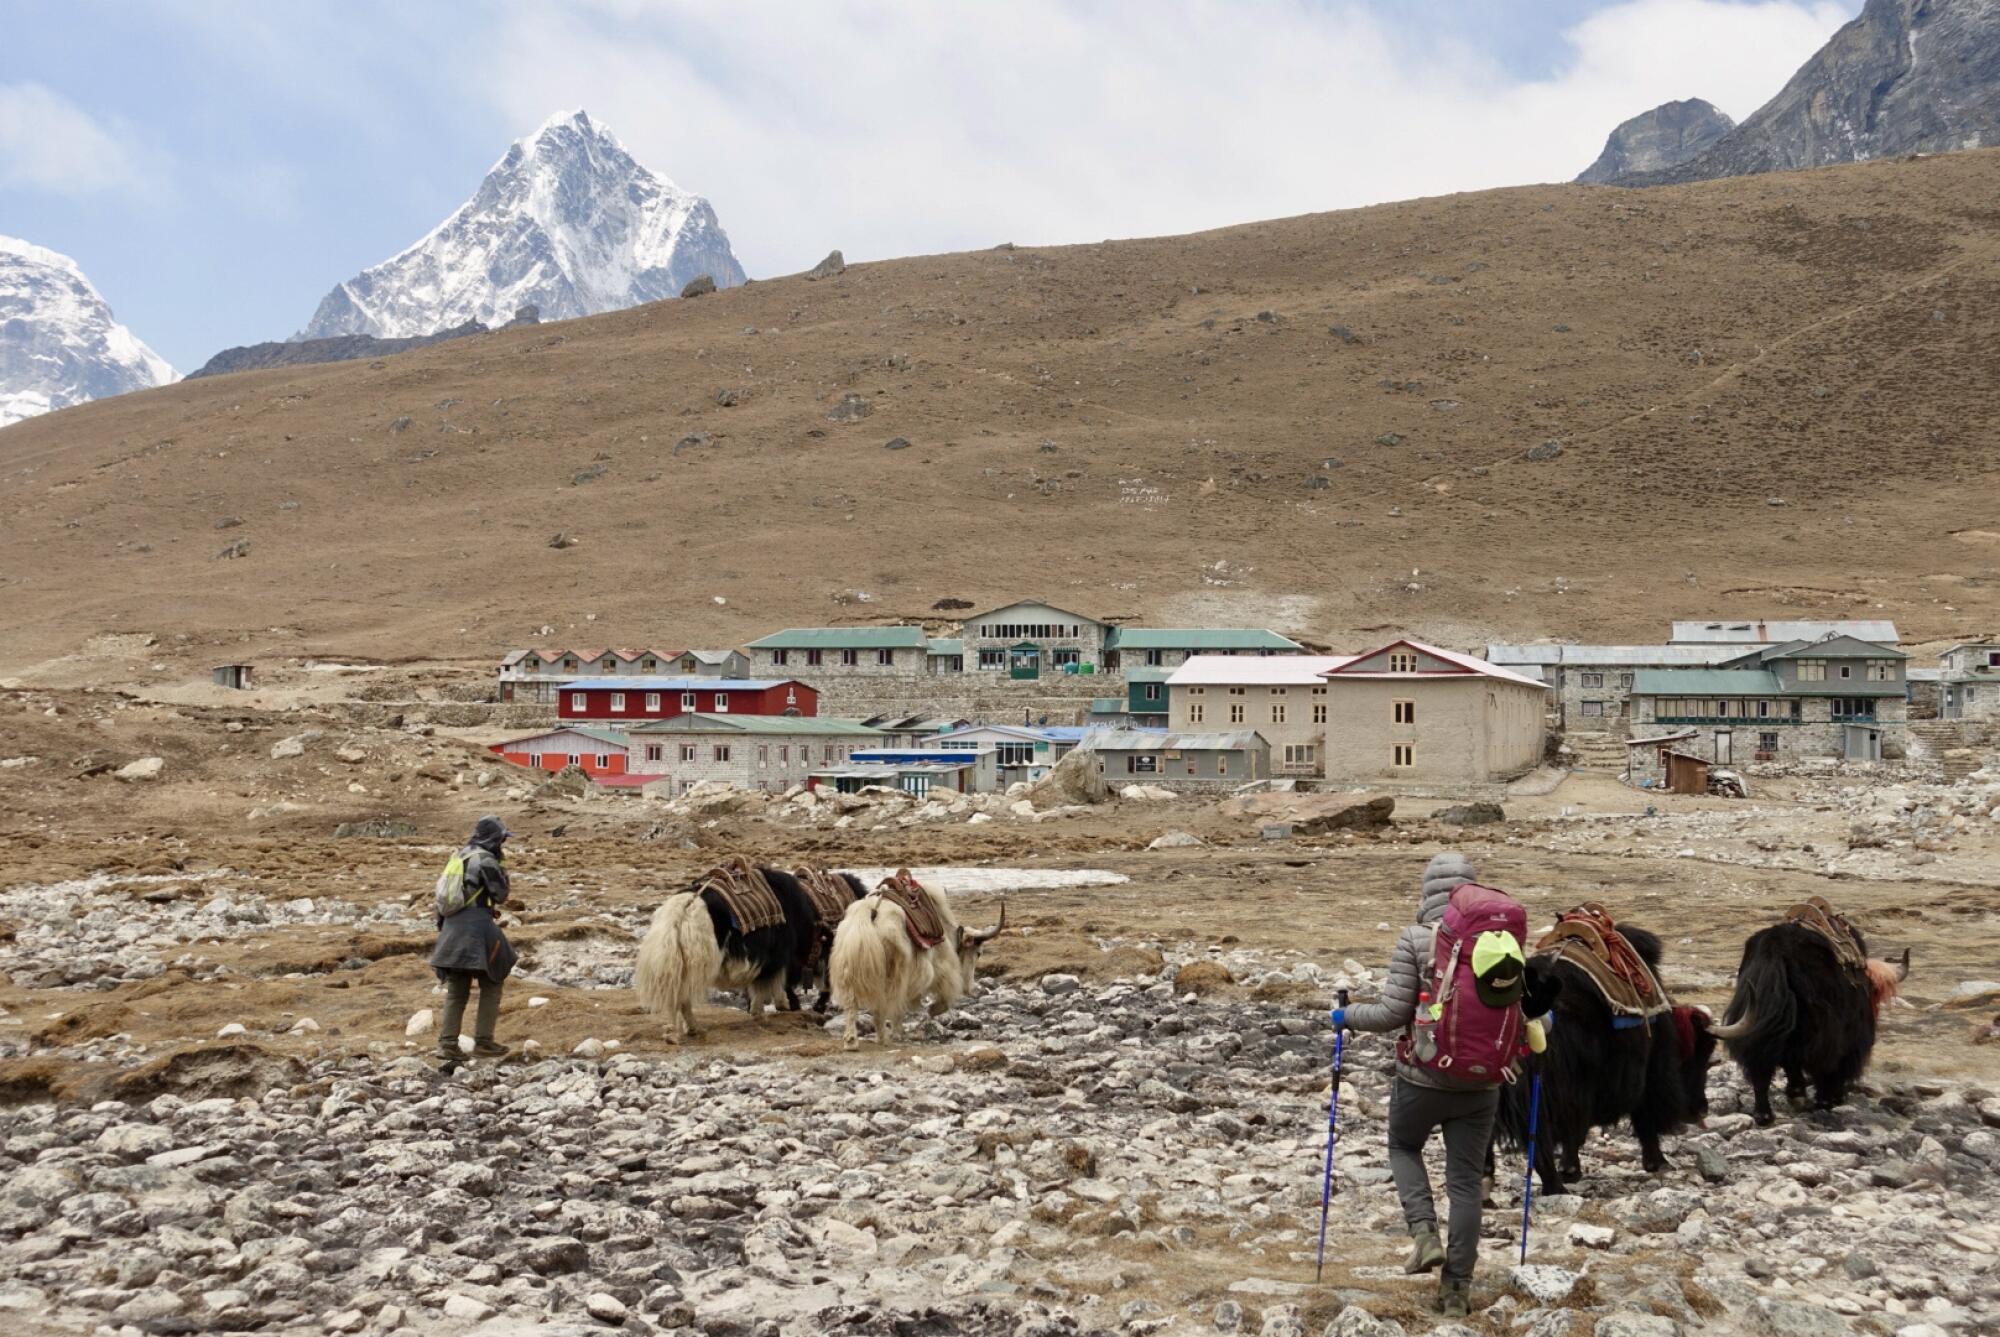 Two people with yaks near a small mountain village